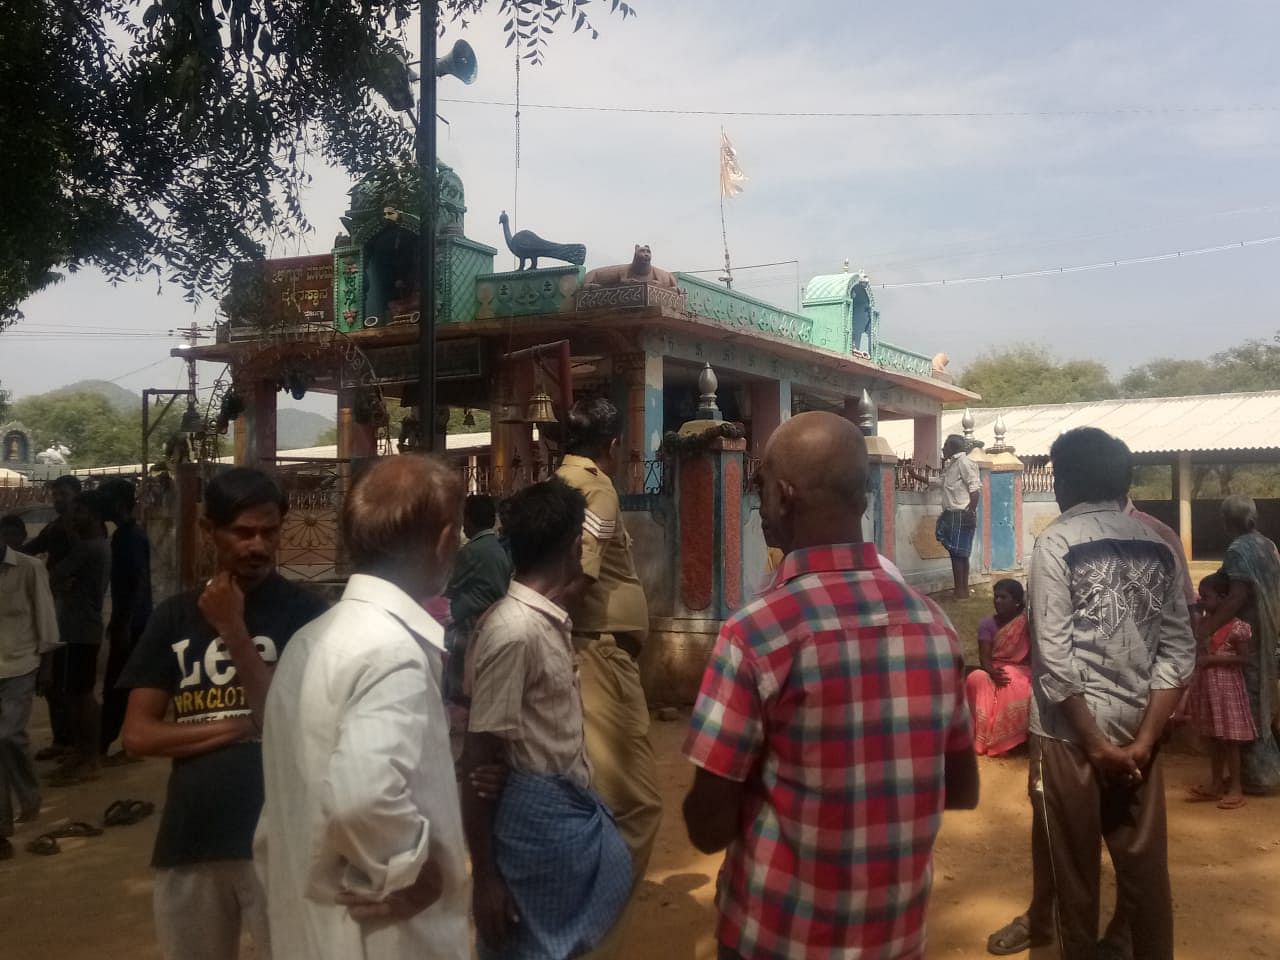 People outside the temple at Sulvadi village in Hanur taluk, Chamarajanagar district. (DH Photo)